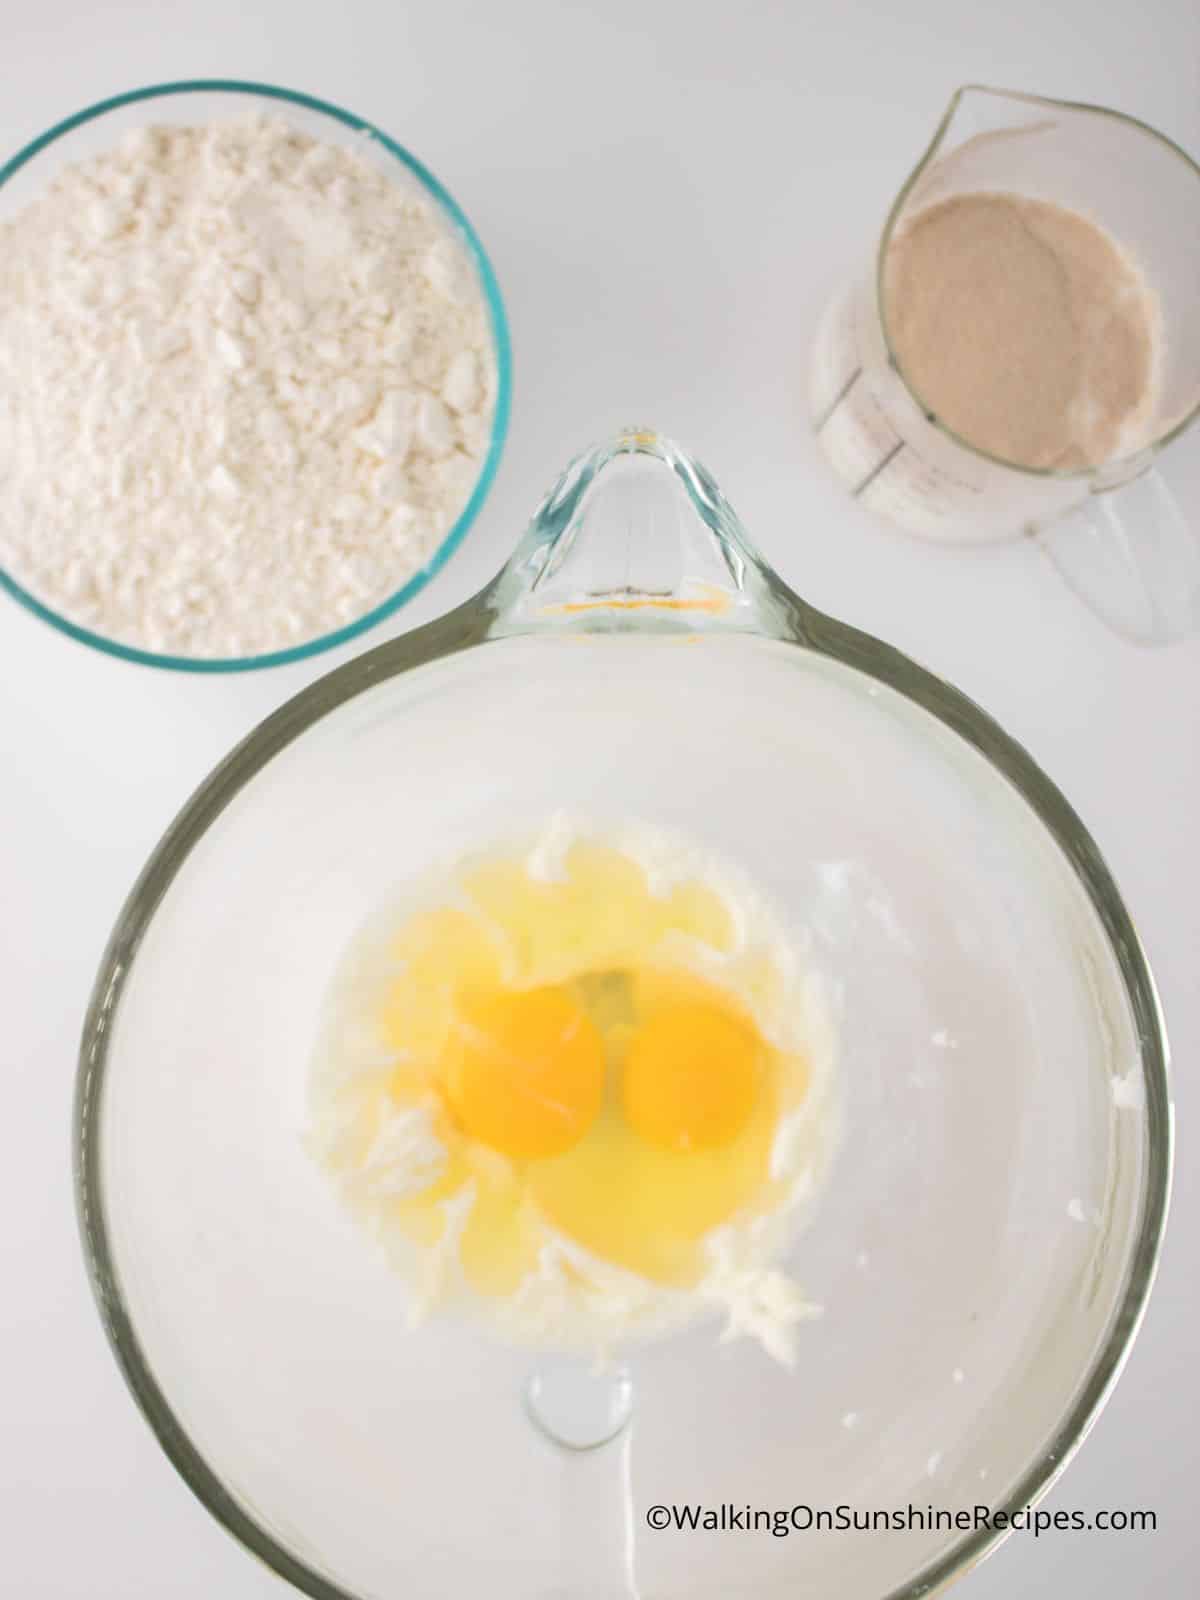 Add eggs to mixture.